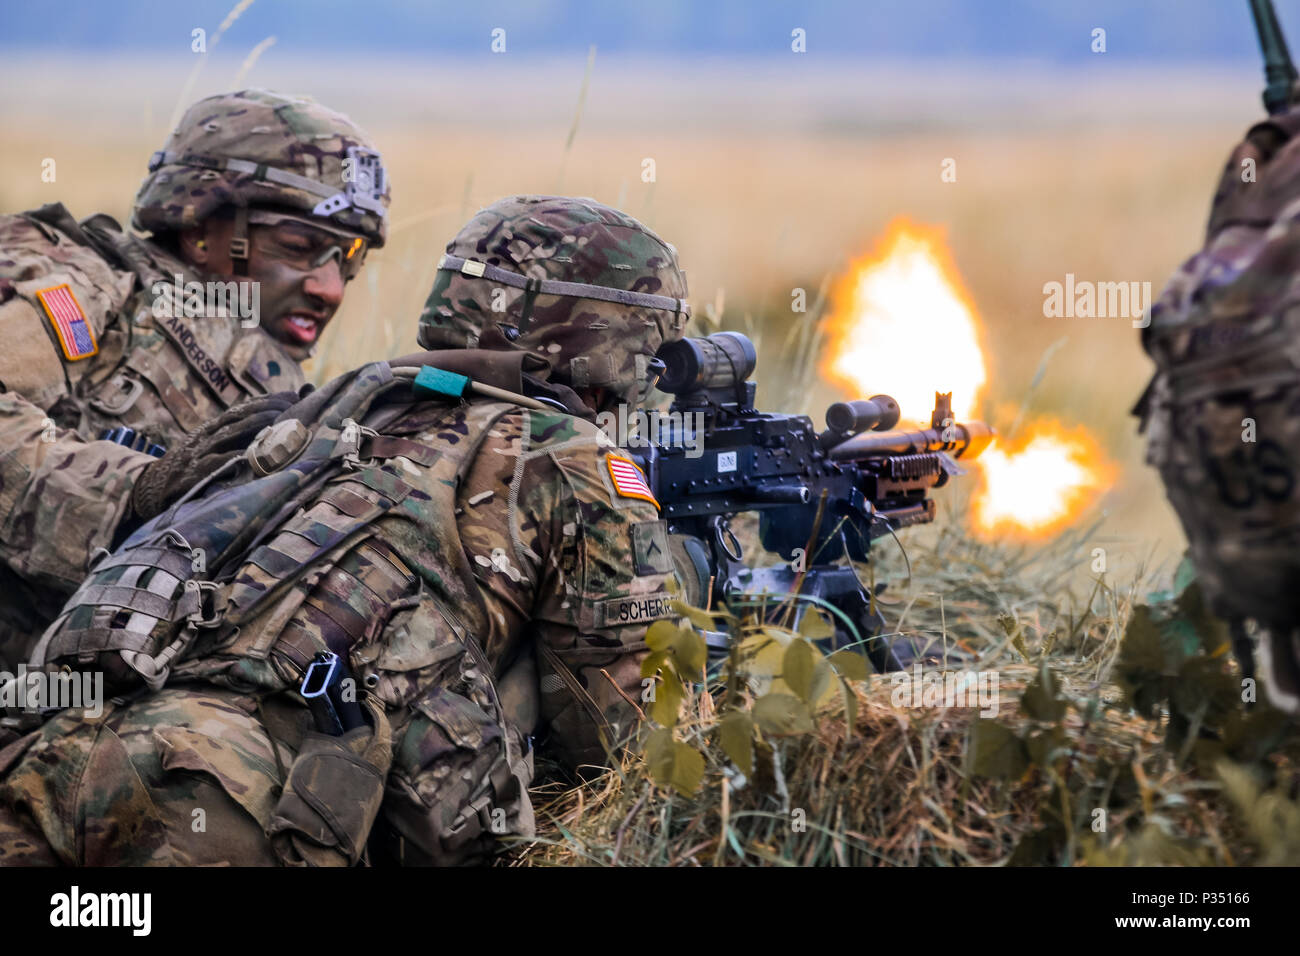 U.S. Army Soldiers with 1st Squadron, 2nd Cavalry Regiment, provide support by fire during a multinational training event for exercise Puma 2 with Battle Group Poland at Bemowo Piskie Training Area, Poland on June 14, 2018 as part of Saber Strike 18. This year's exercise, which runs from June 3-15, tests allies and partners from 19 countries on their ability work together to deter aggression in the region and improve each unit's ability to perform their designated mission. (U.S. Army photo by Spc. Hubert D. Delany III /22nd Mobile Public Affairs Detachment) Stock Photo